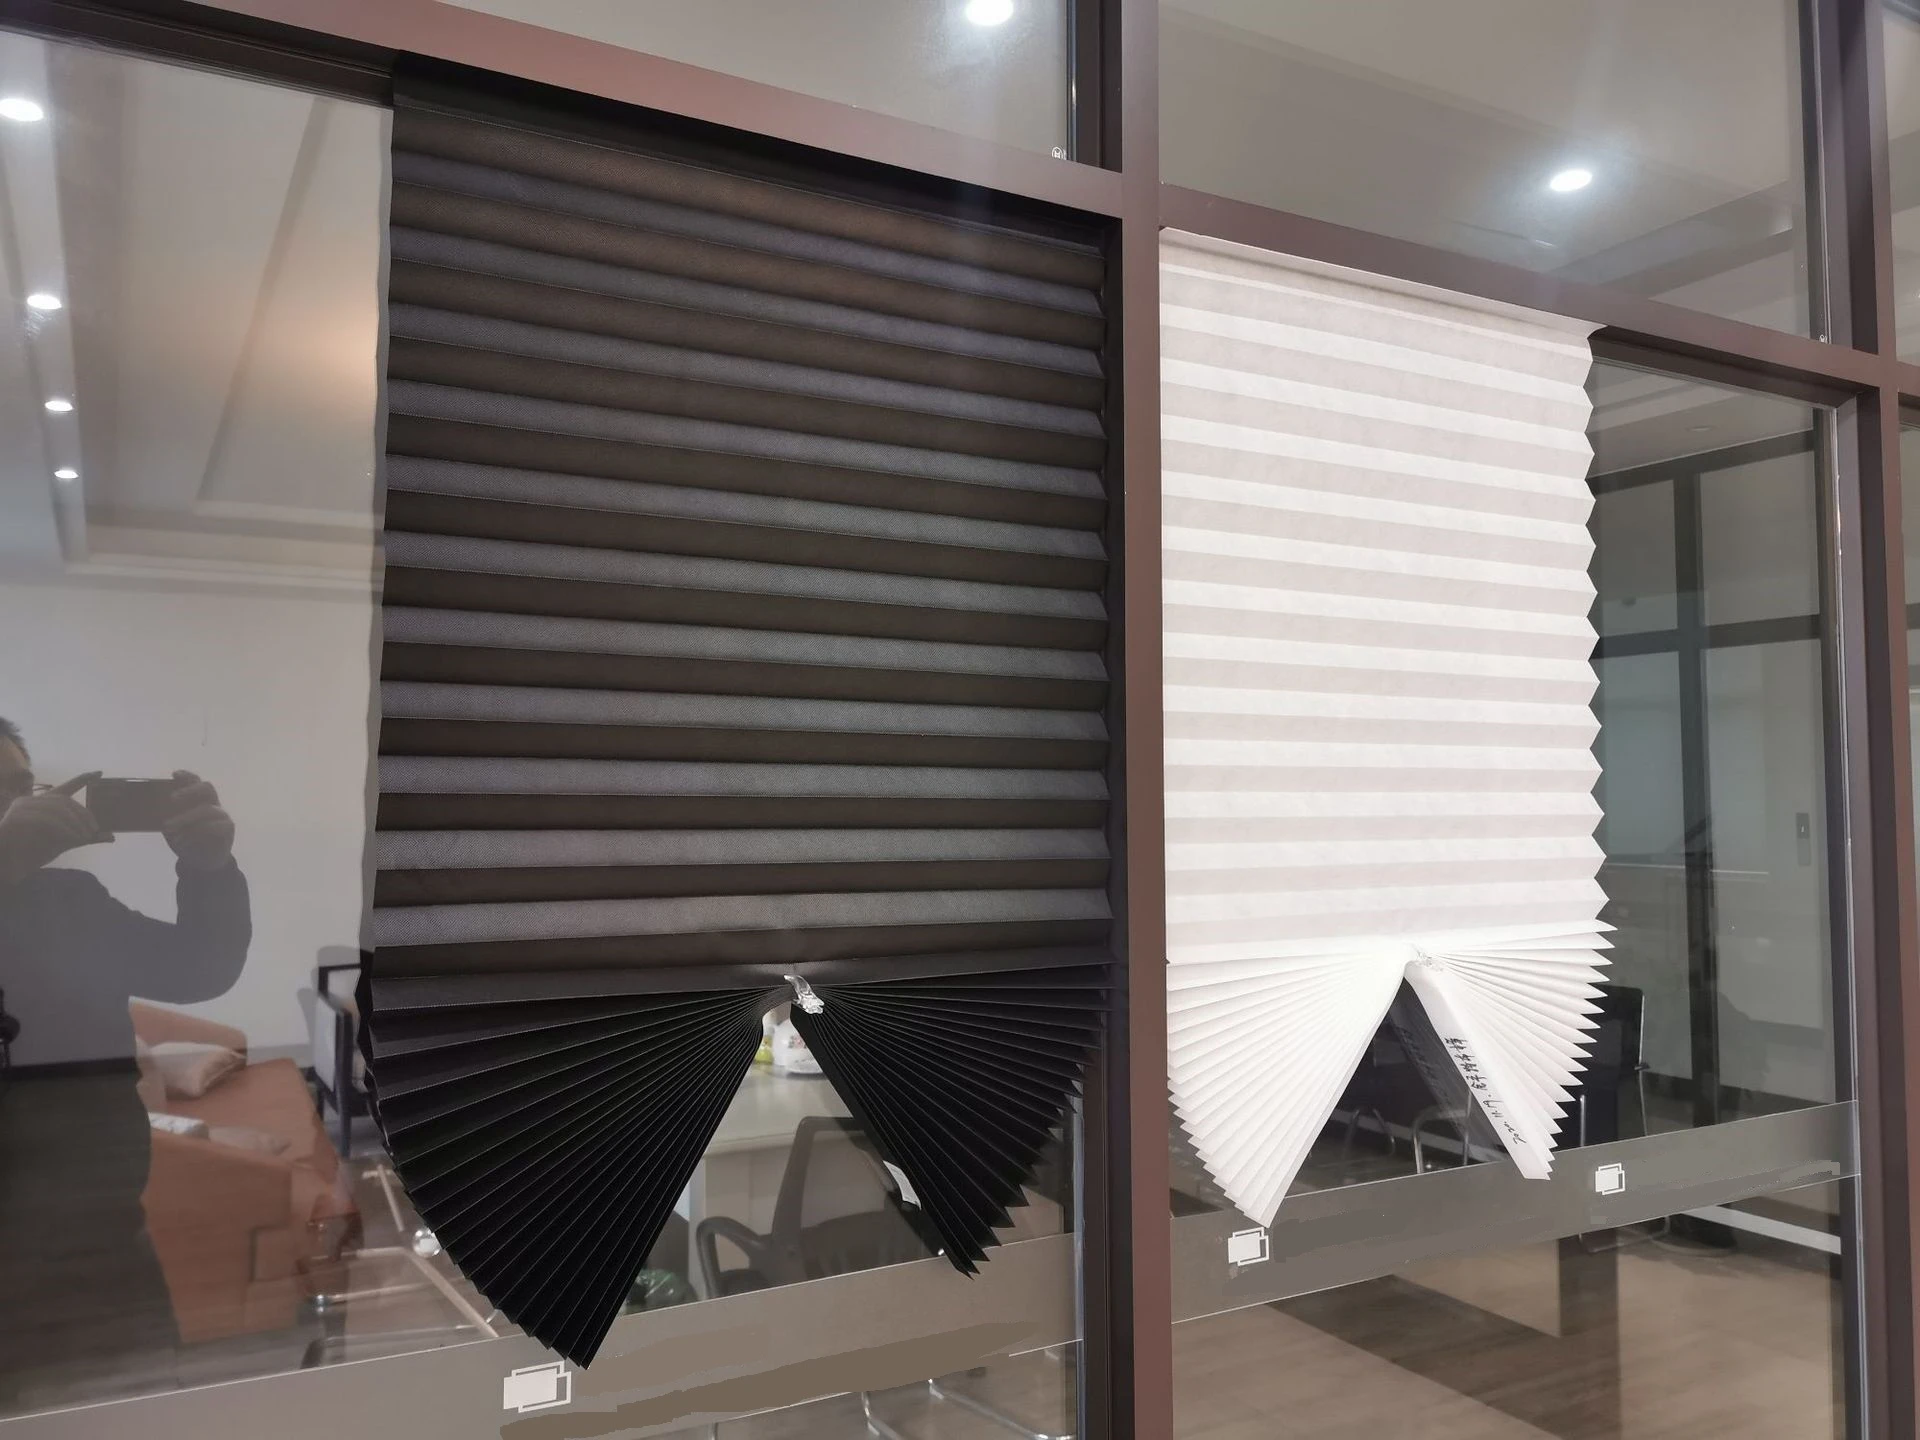 Super Wonderful Blinds Shades To Protect The Sun Window Blinds Zebra Roller Half Blackout Curtains For Bedroom Bathroom,Kitchen